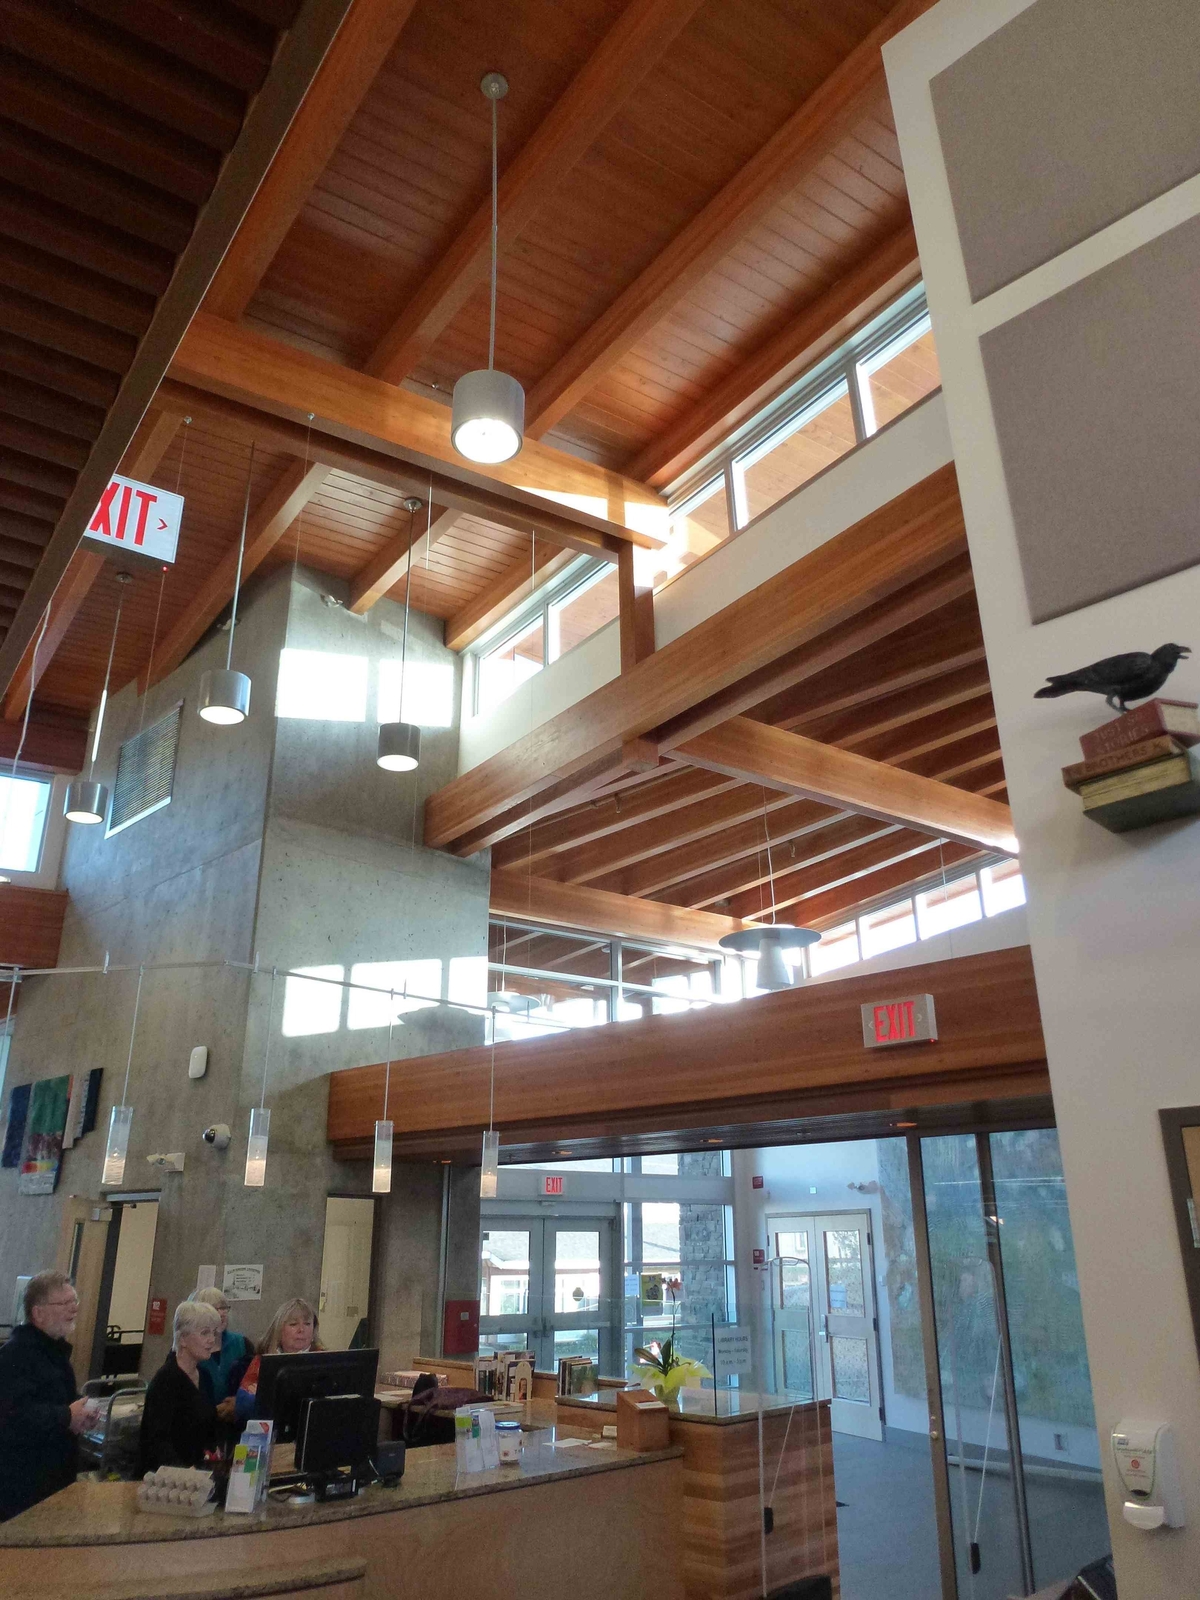 Interior upward close up daytime view of Salt Spring Island Library ceiling structure, showing glue-laminated timber rafters as a component of acoustic linear wood ceilings, which muffle noise to help preserve a quiet, peaceful atmosphere